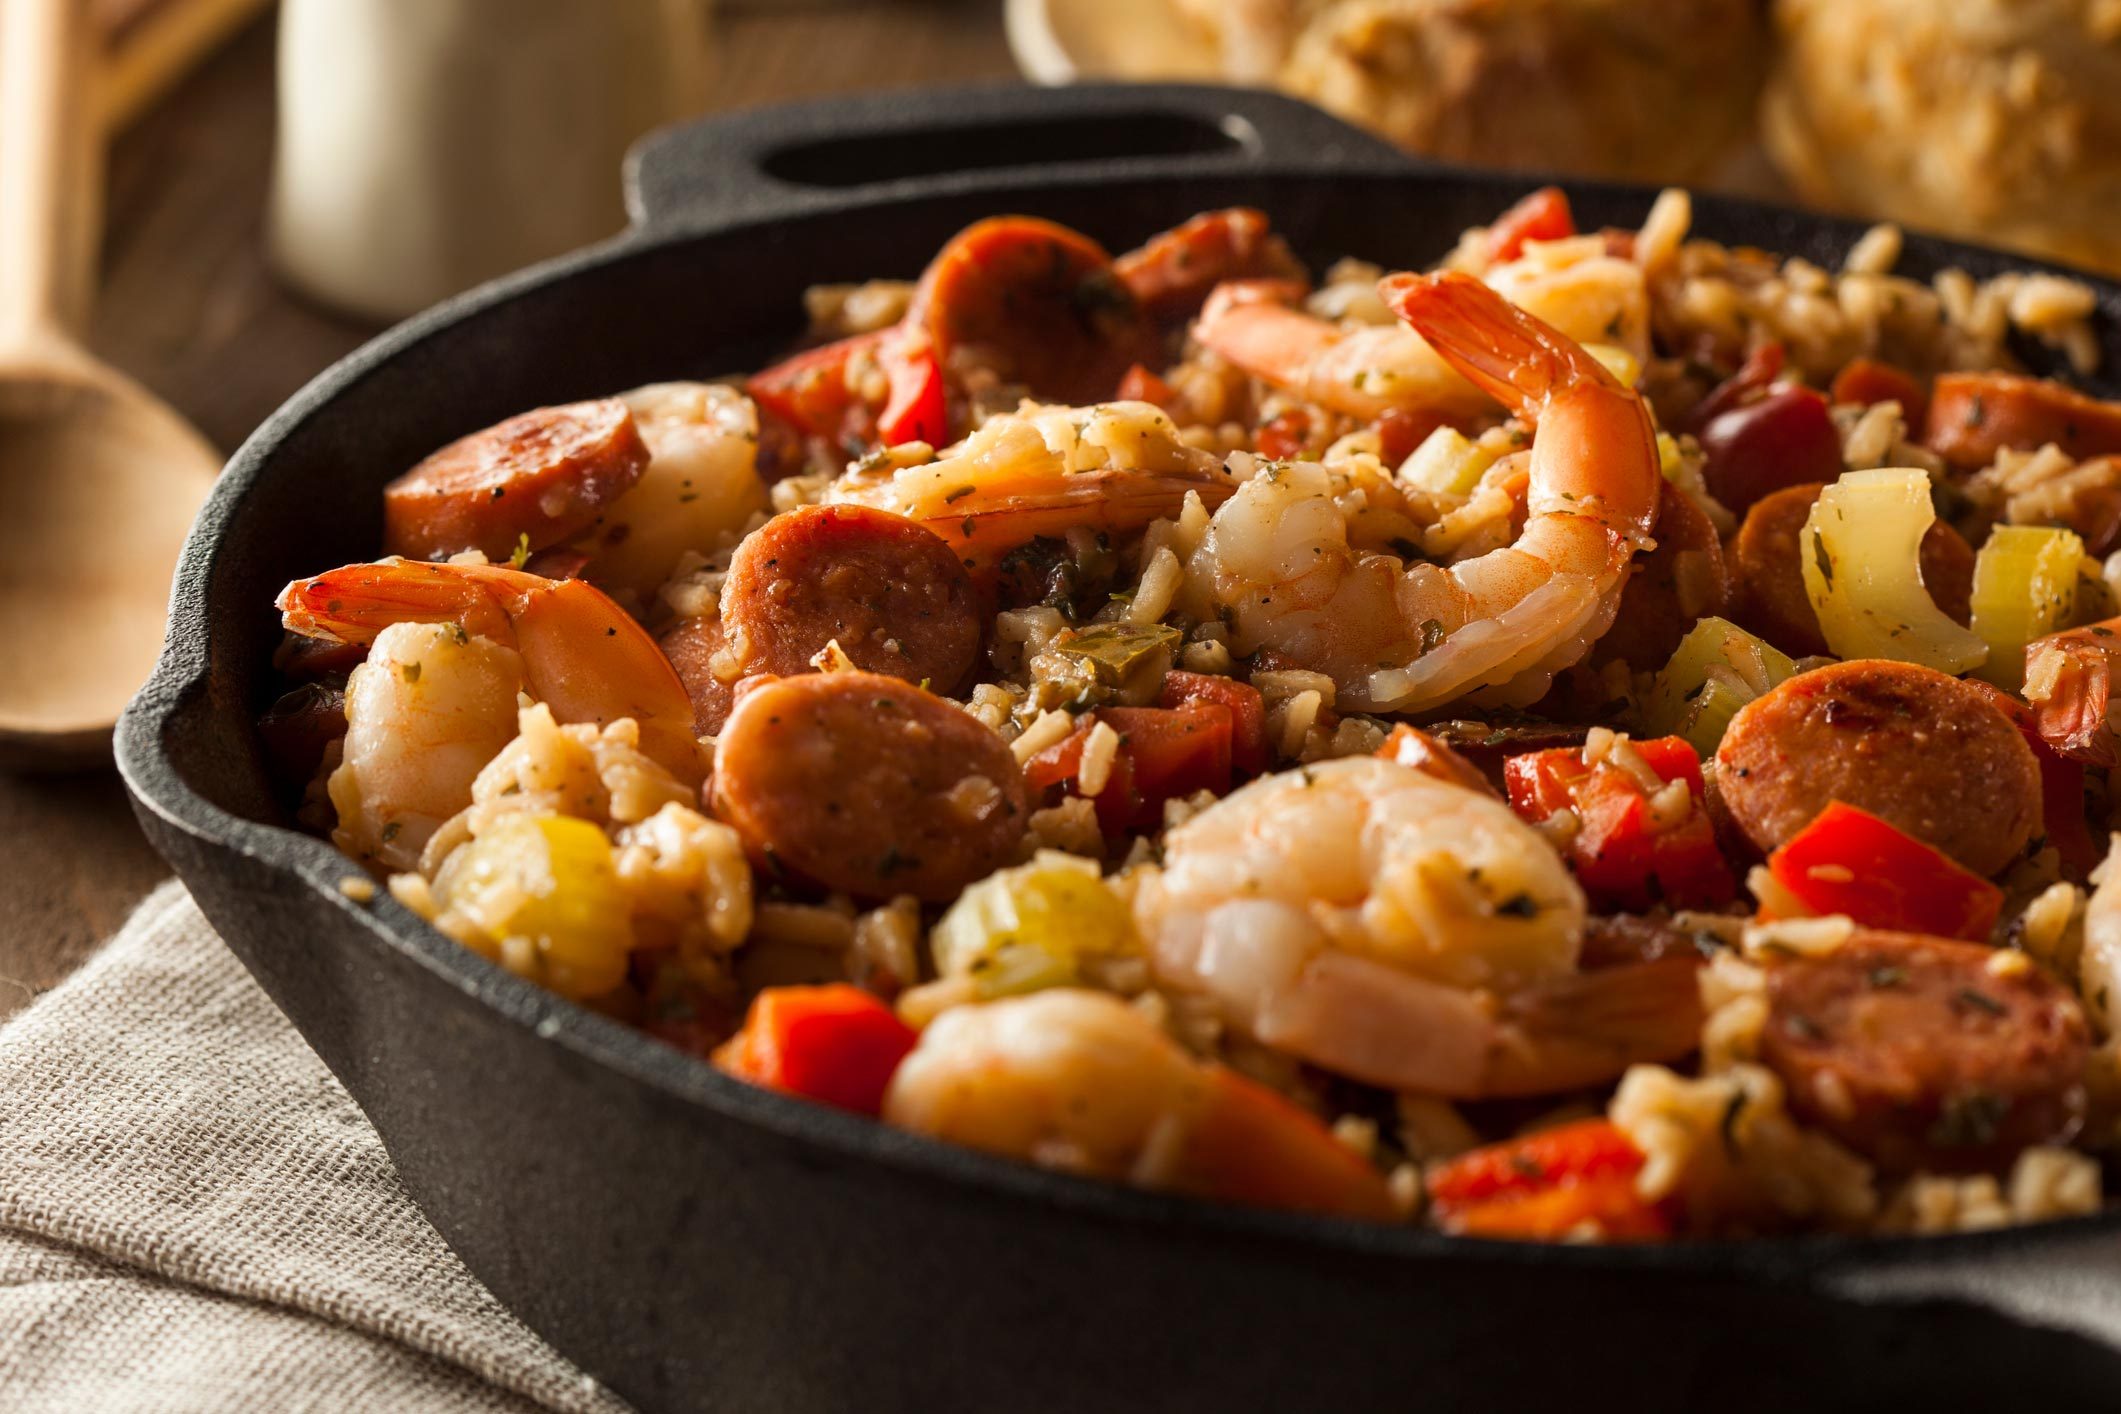 Cajun vs. Creole Food: What's the Difference Between These Cuisines?